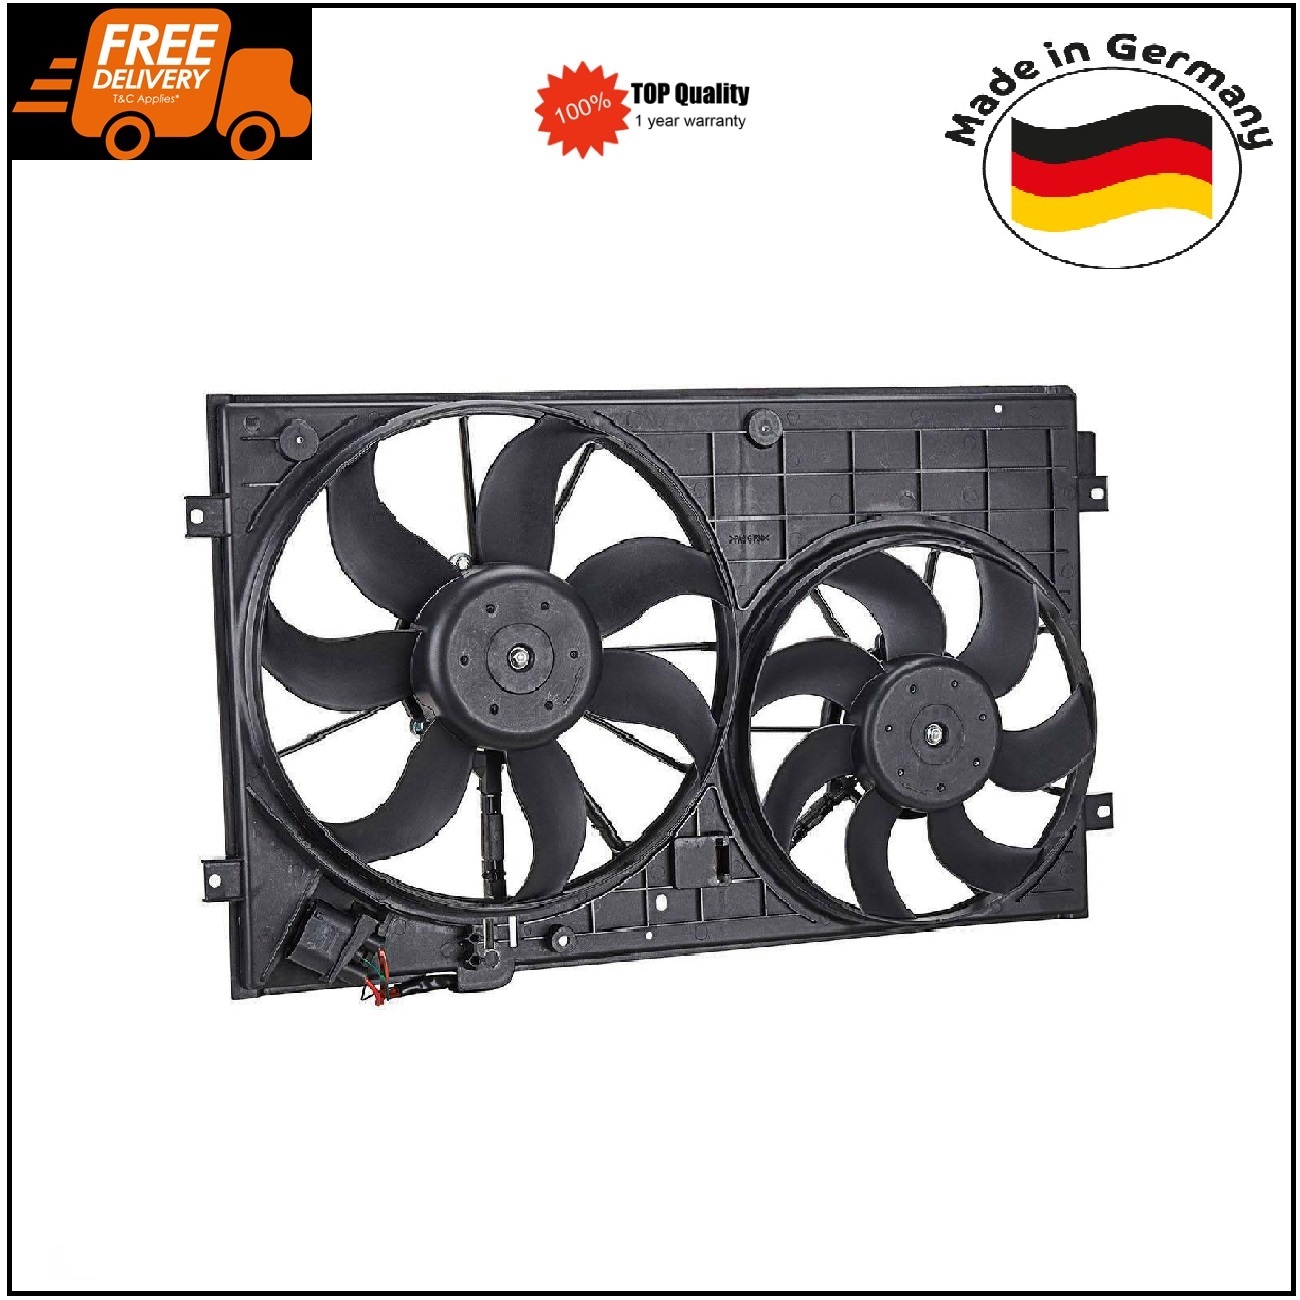 Radiator Cooling Dual Fan Assembly for Audi A3 VW Golf Jetta Manual Auto